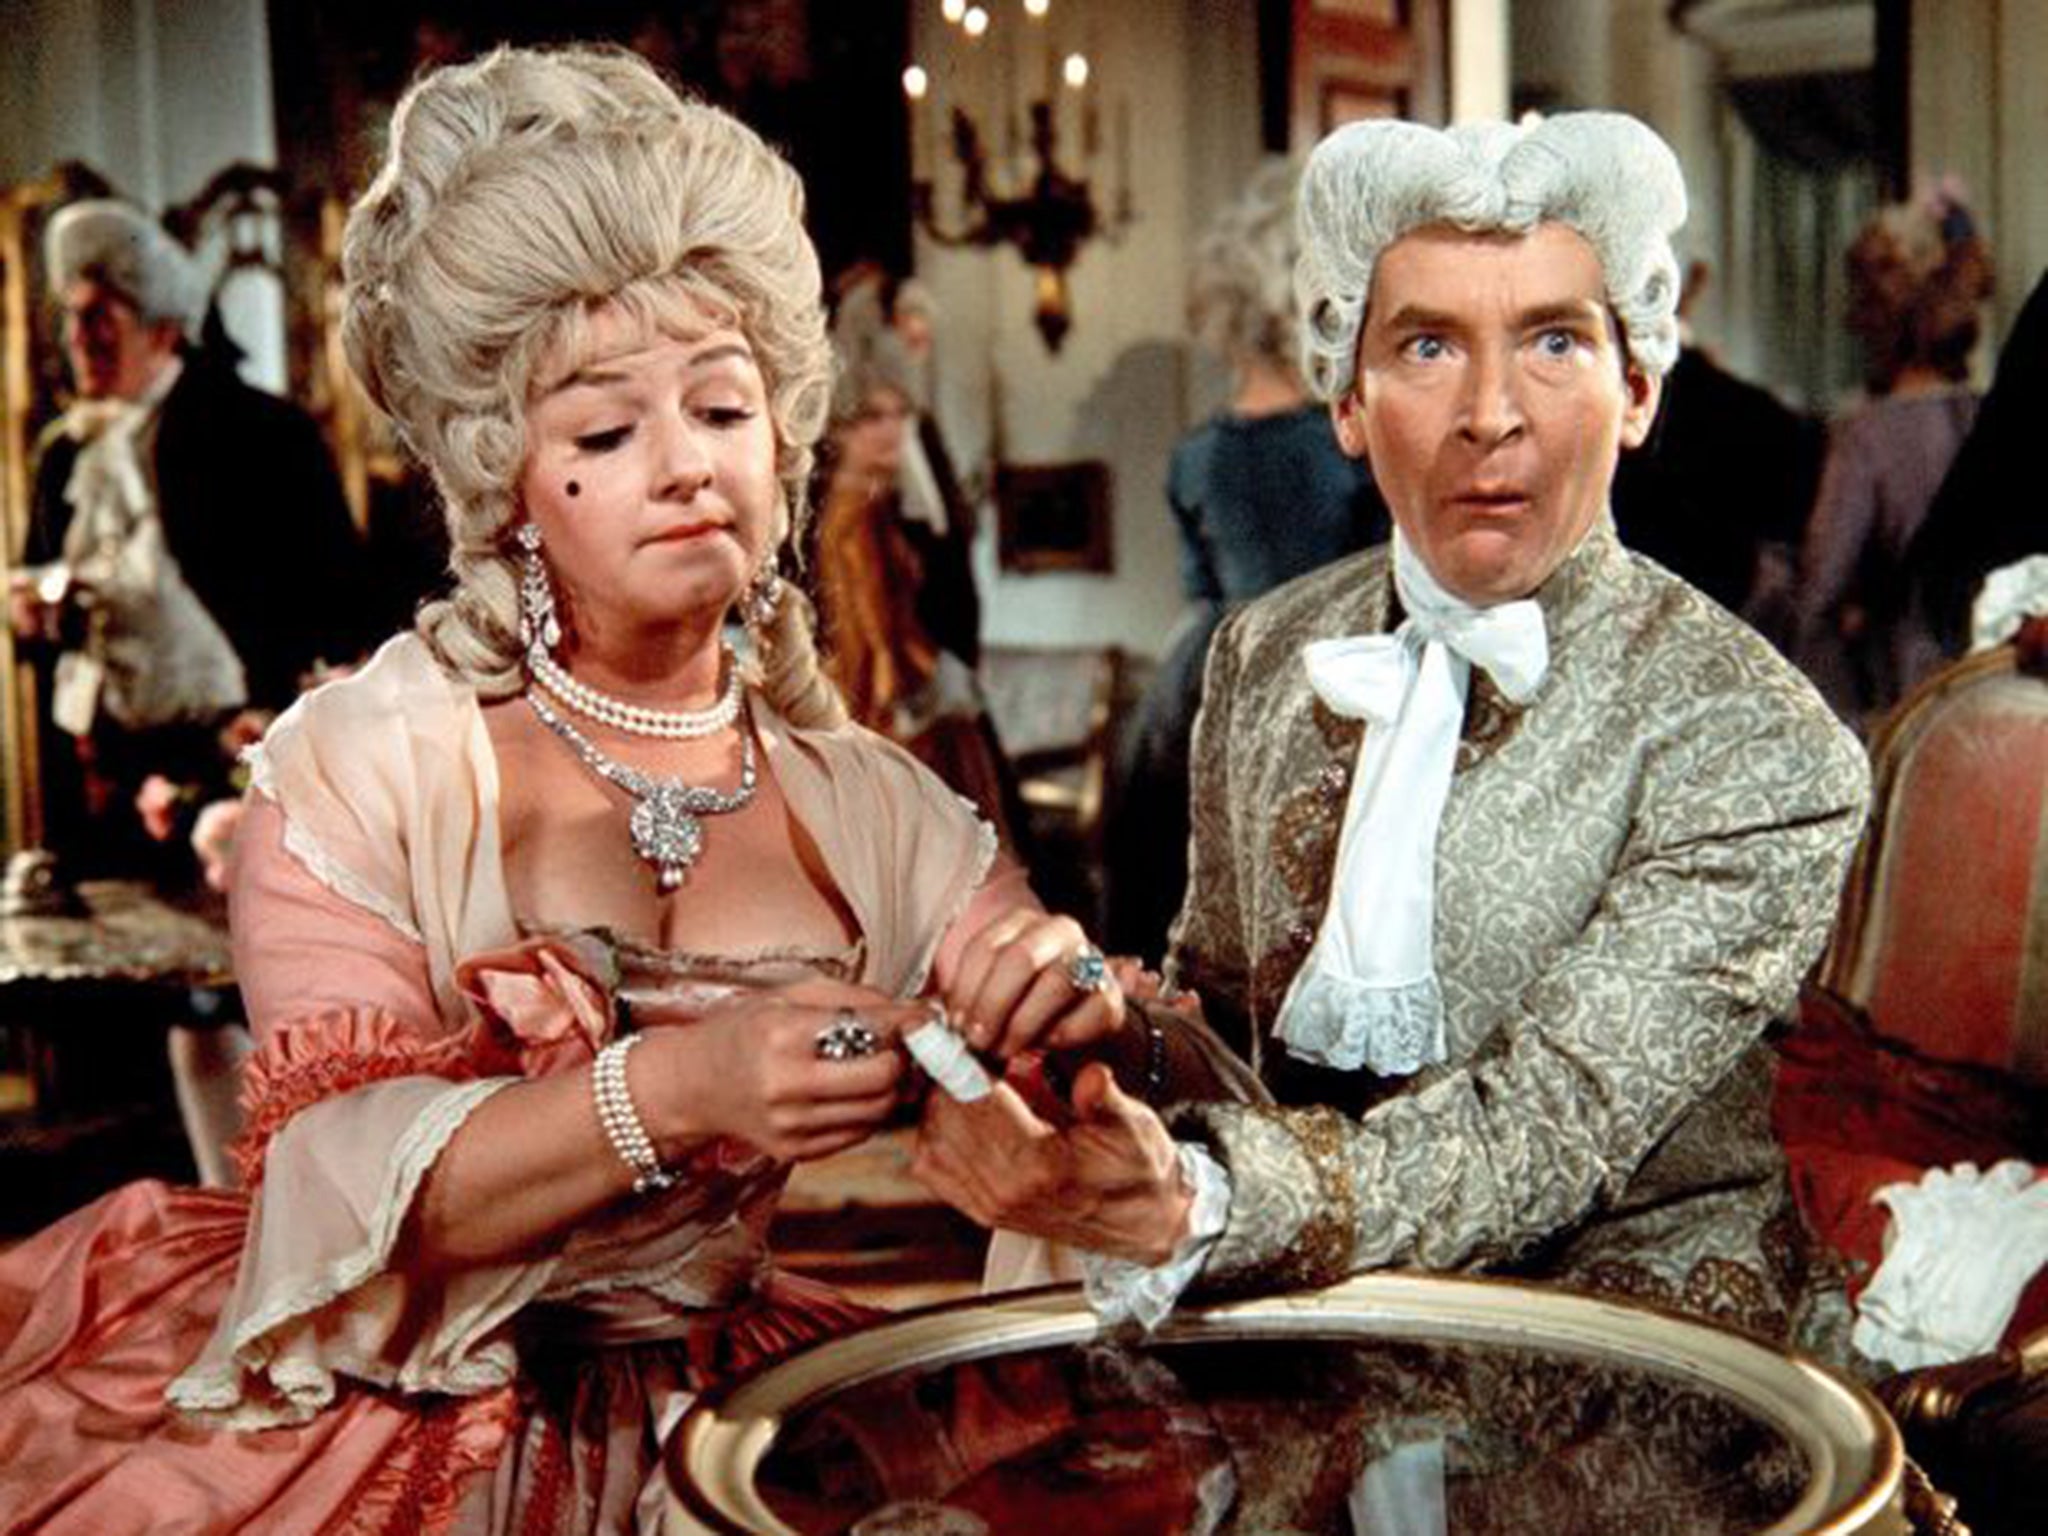 Joan Sims and Kenneth Williams were two of the stalwarts of the original series of films